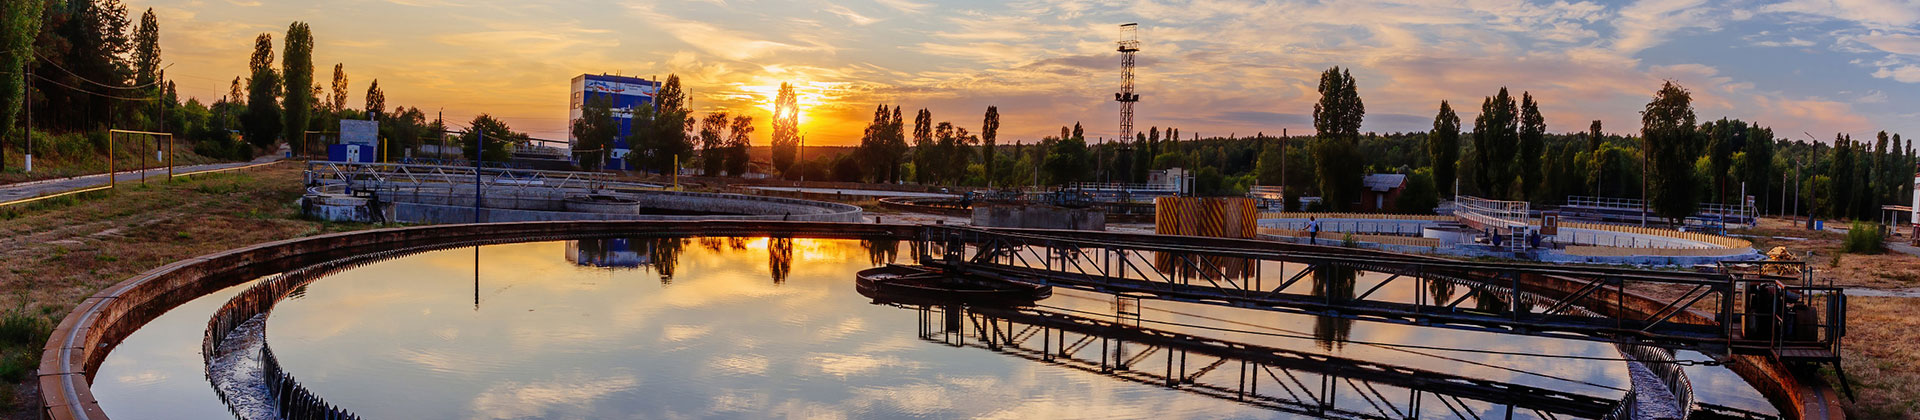 Wastewater Treatment Plant at Sunset